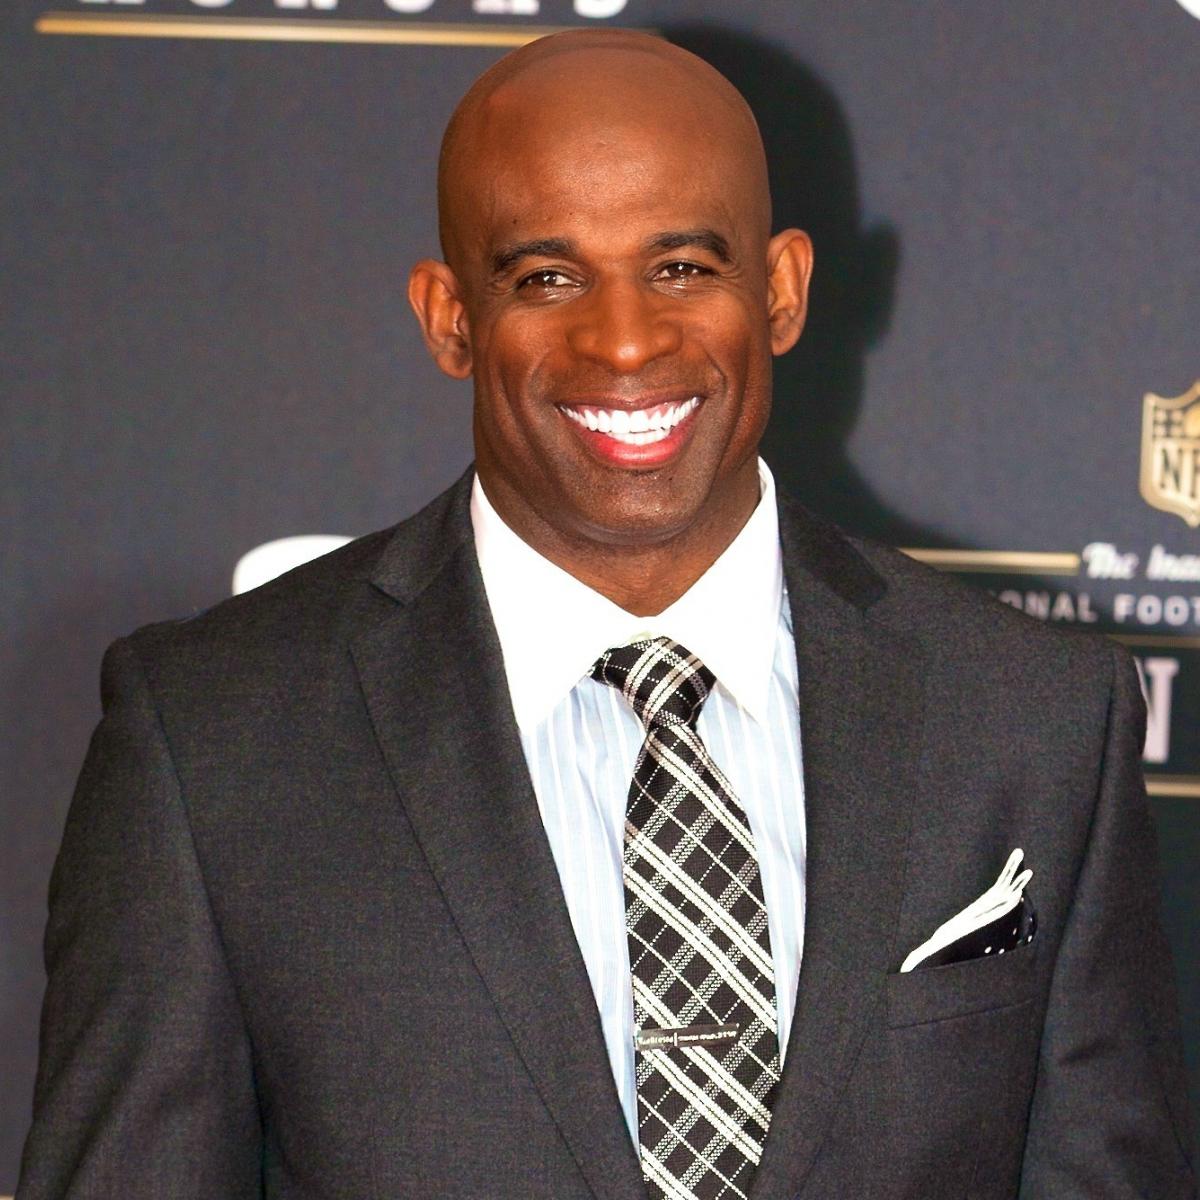 Deion Sanders to Bring the 'Crazy and Chaotic' for Oprah Winfrey ...